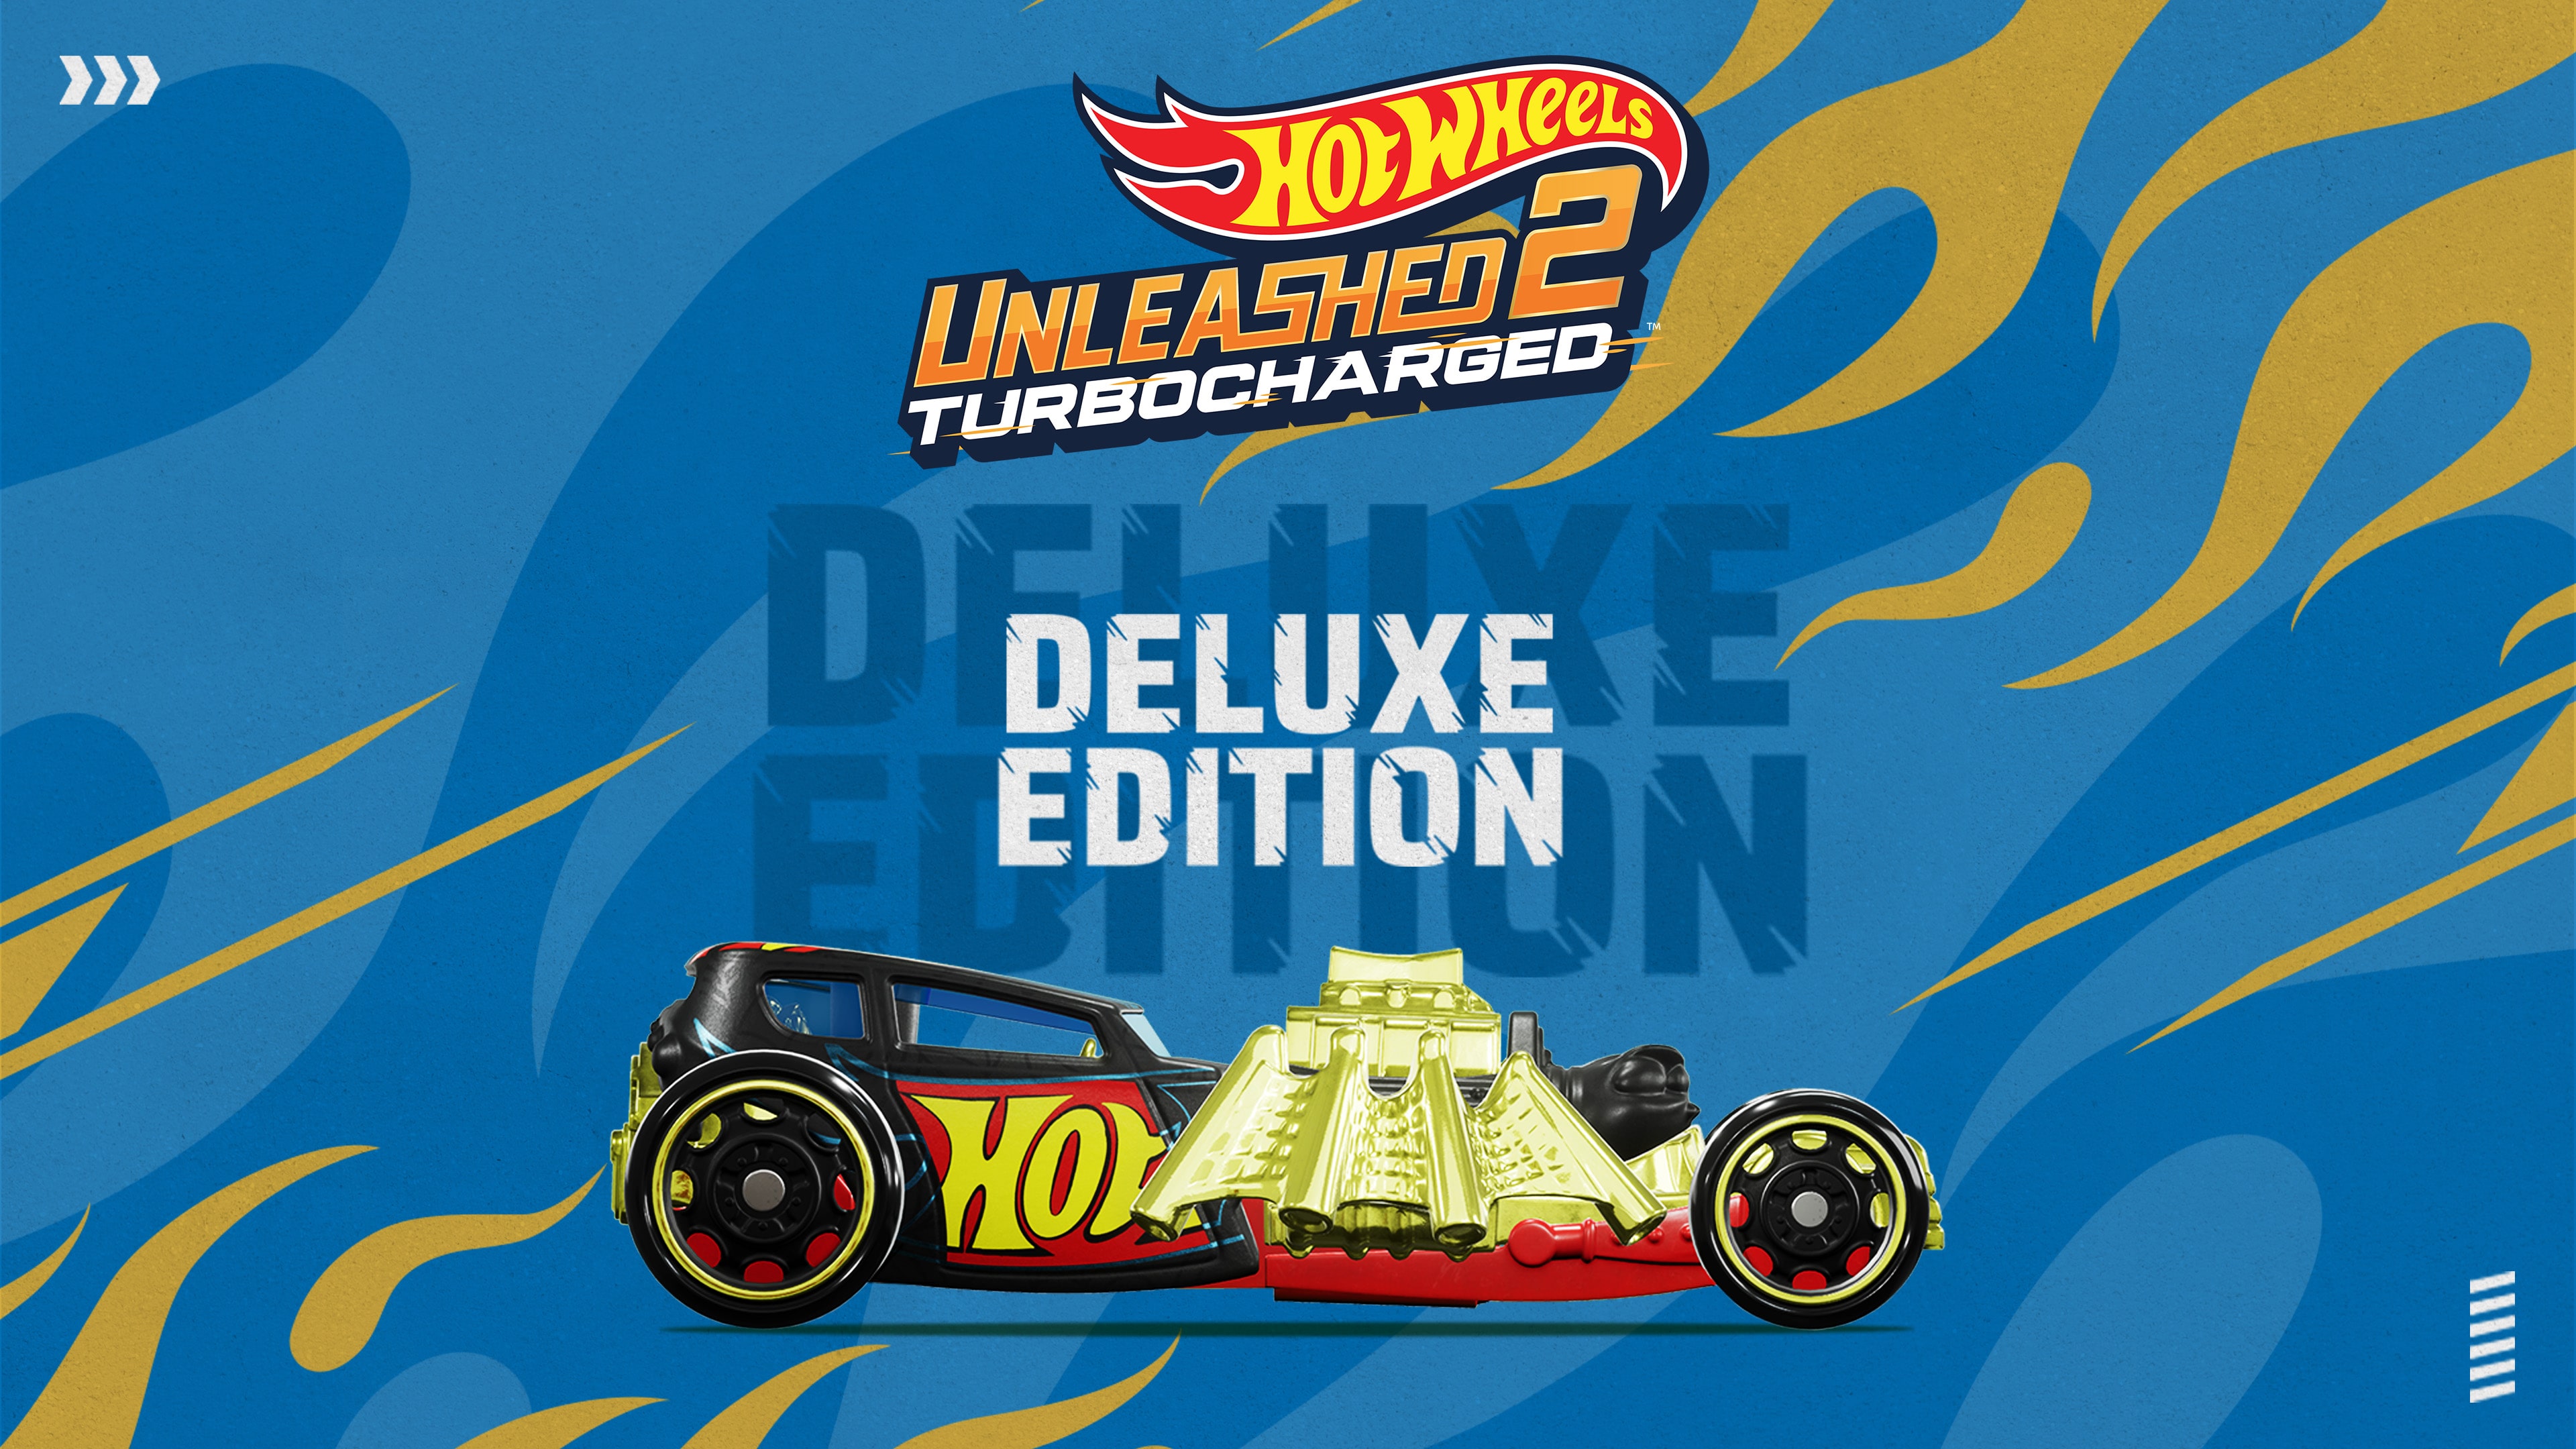 HOT WHEELS 2 Turbocharged Edition - Deluxe - PS4 UNLEASHED™ & PS5